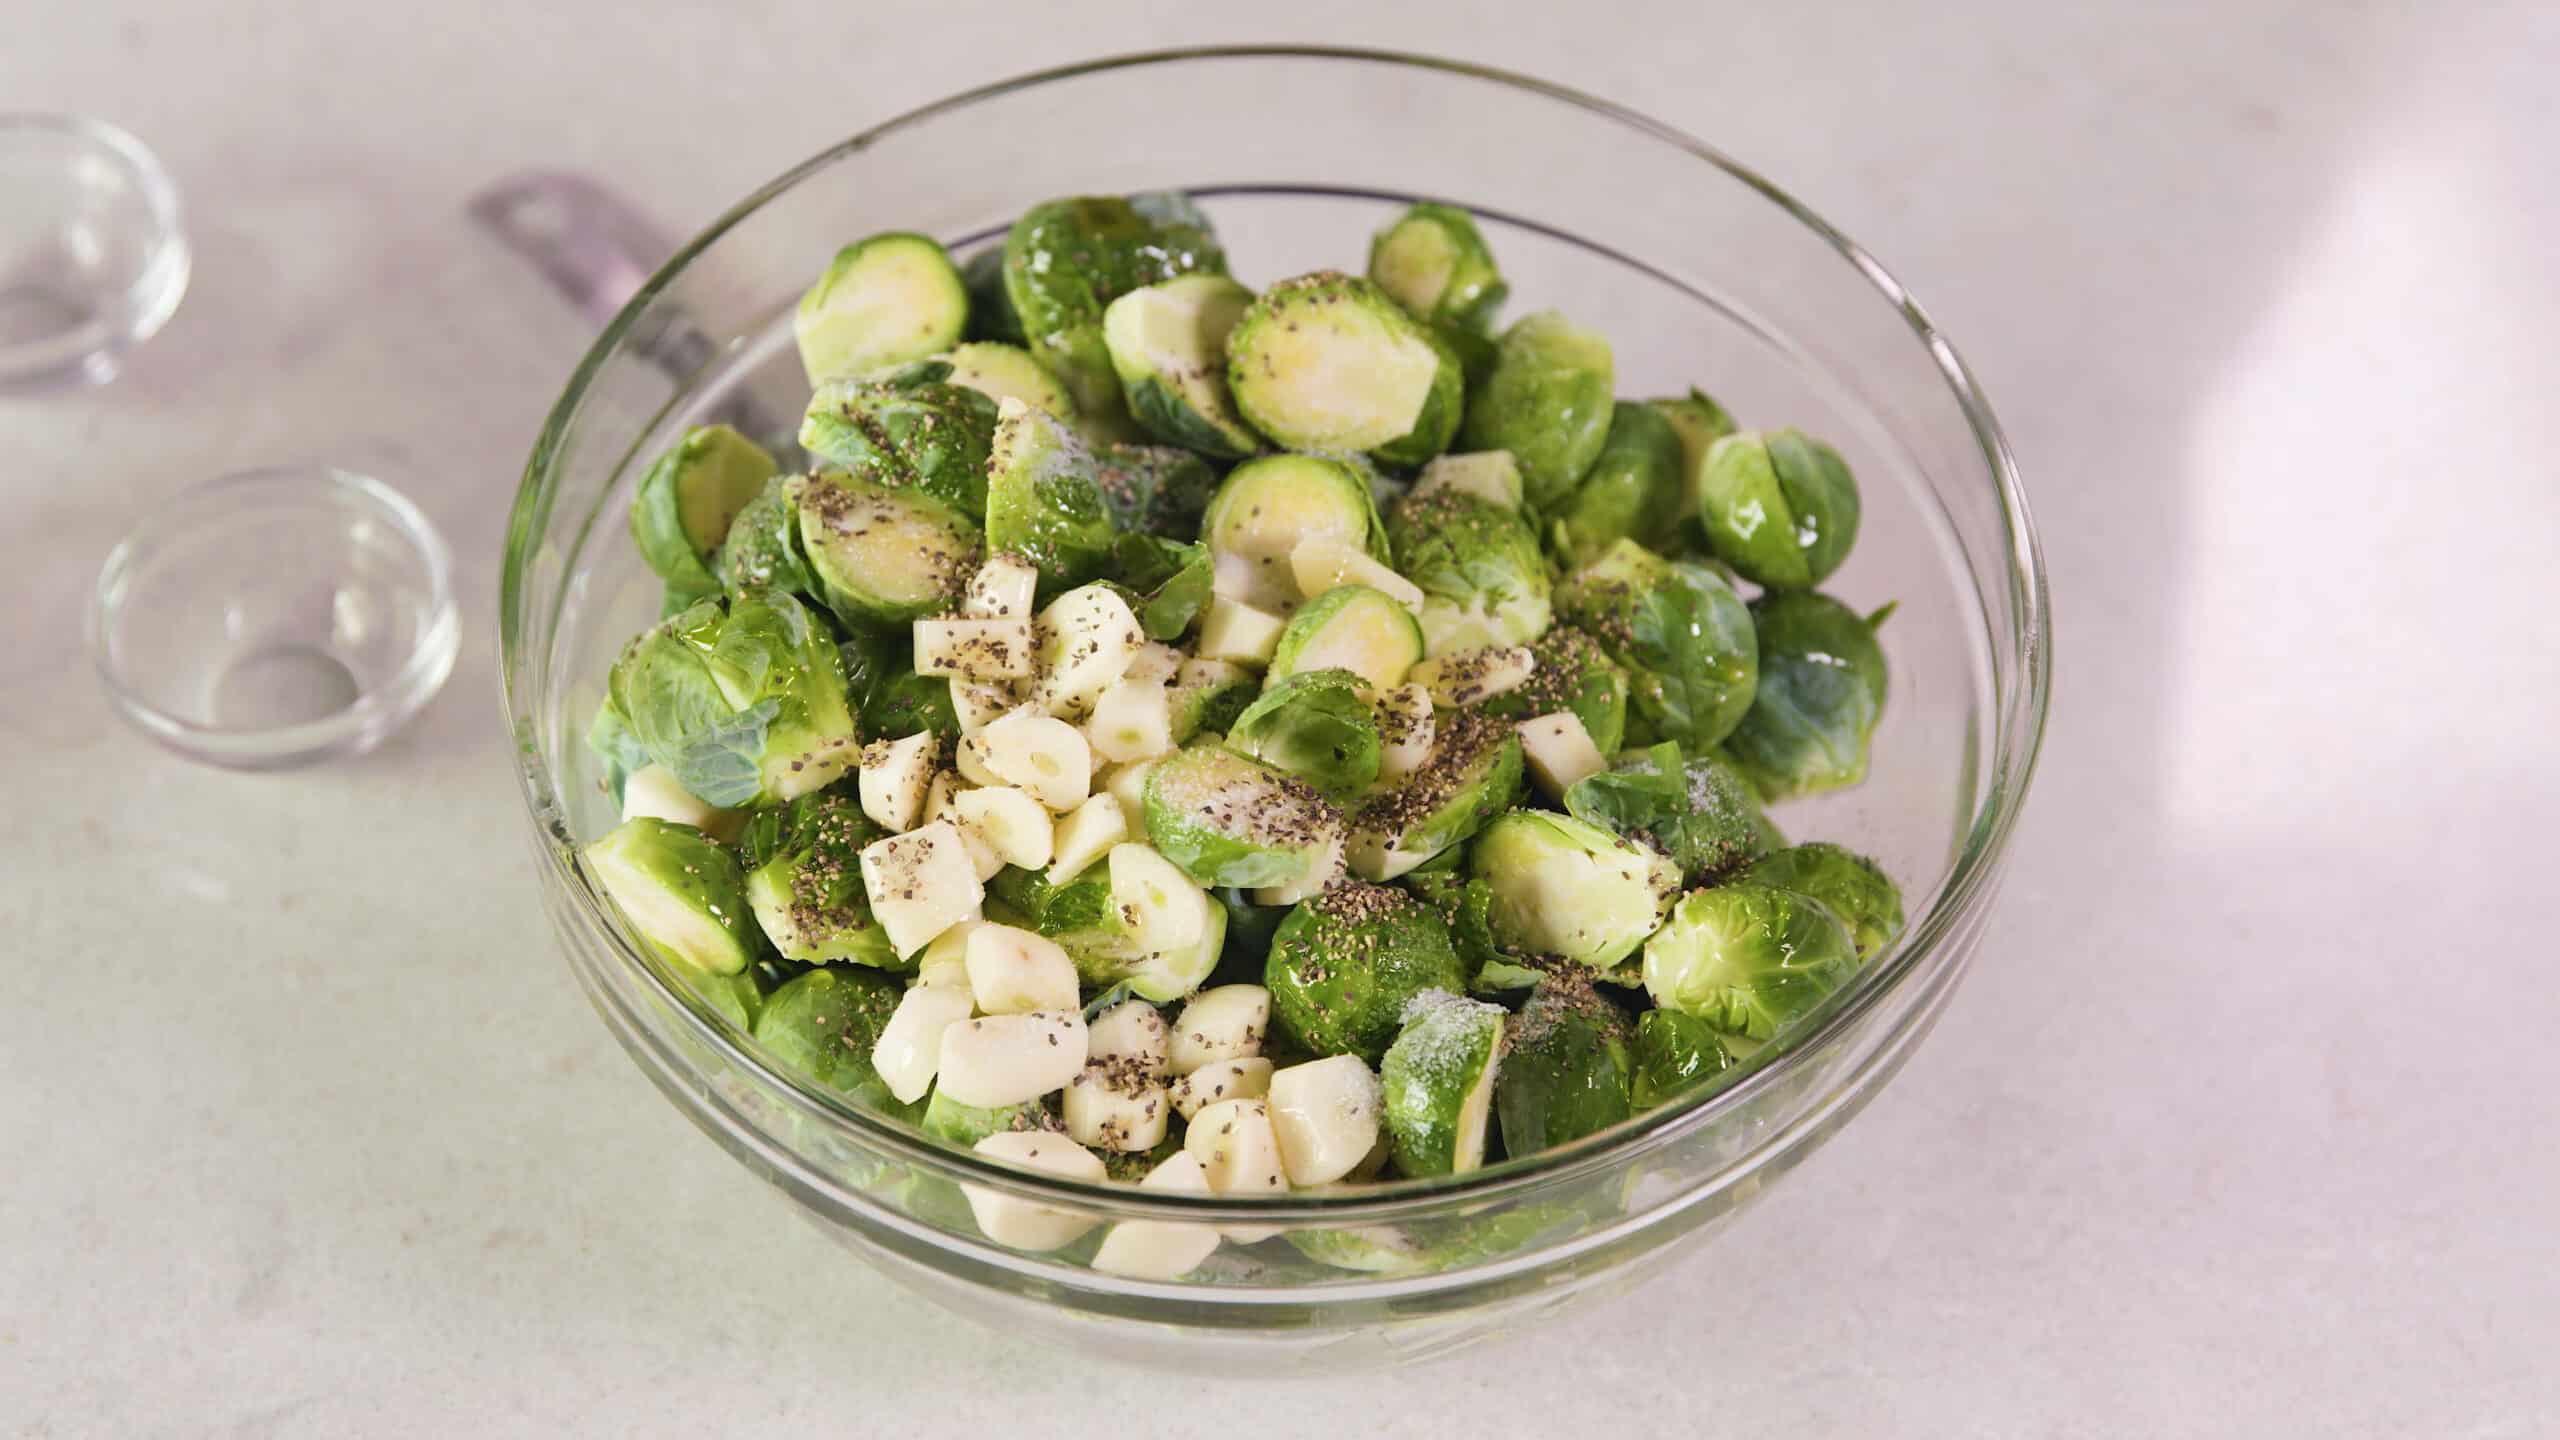 Angled view of large clear glass mixing bowl filled with sliced garlic and halved Brussel sprouts topped with olive oil, freshly ground black pepper and salt to taste.